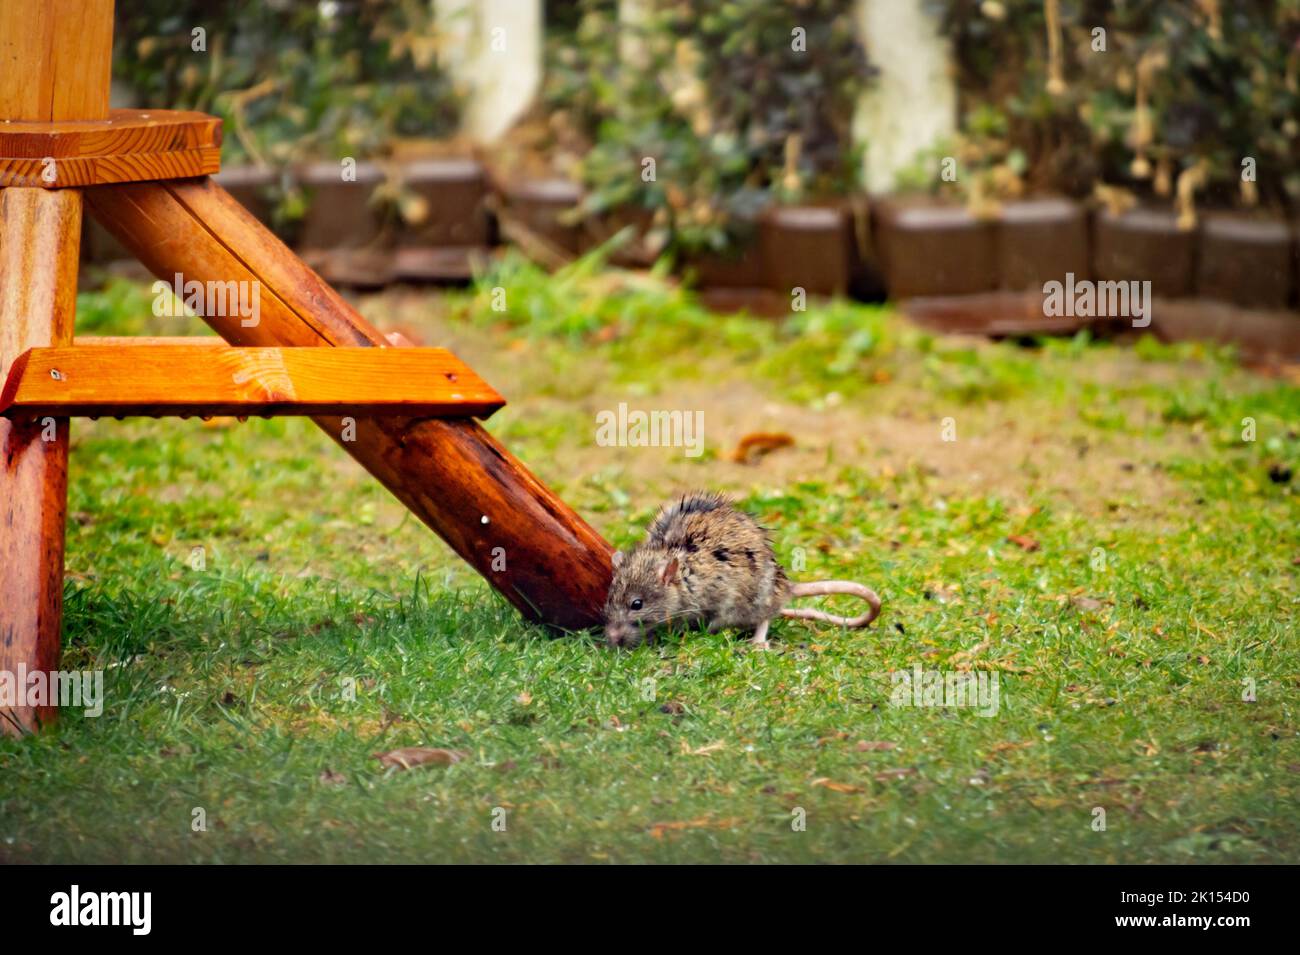 A wild rat in the rain in a green garden. It eats fallen bird food. Shown are the wooden stands of a bird feeder house. Stock Photo